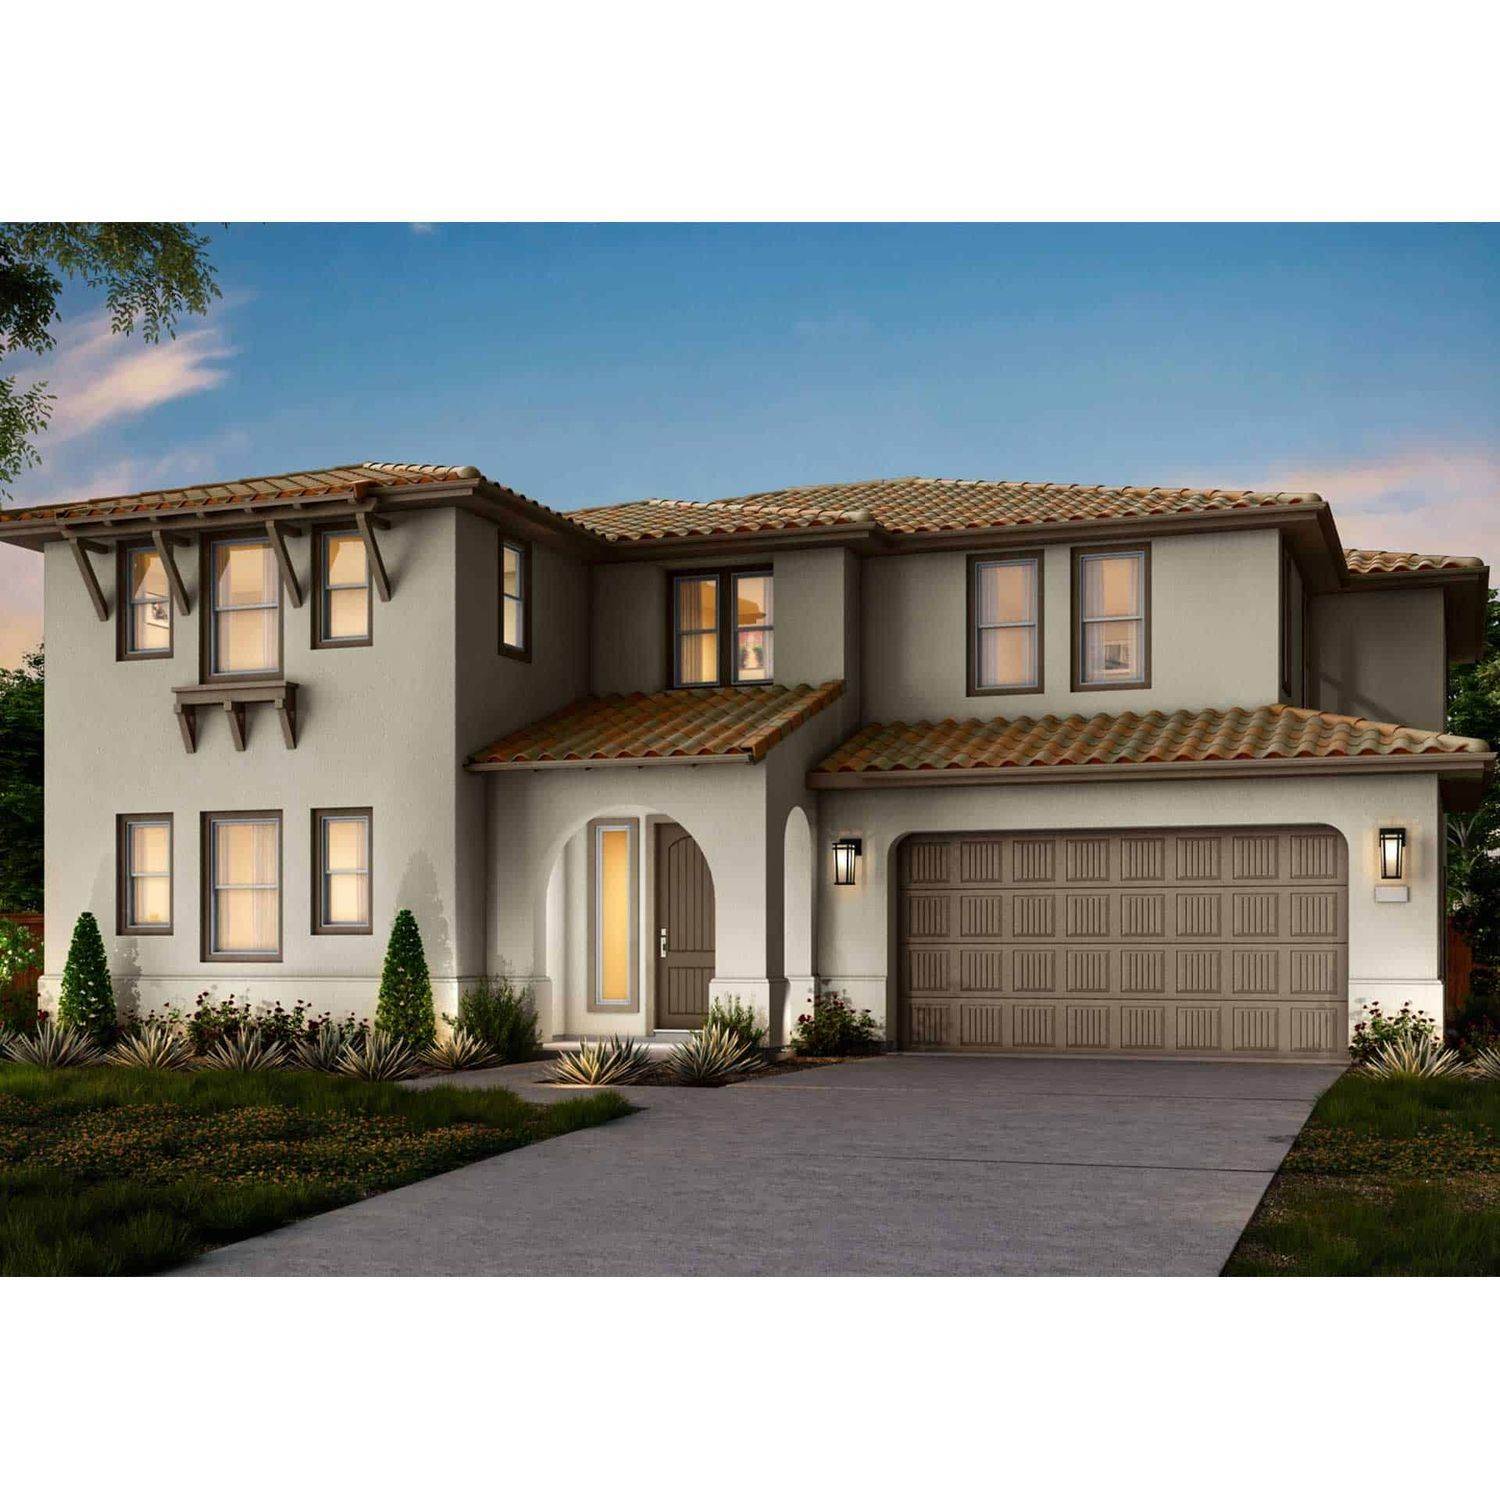 7. The Cove at River Islands building at 2799 Orion Court, Lathrop, CA 95330